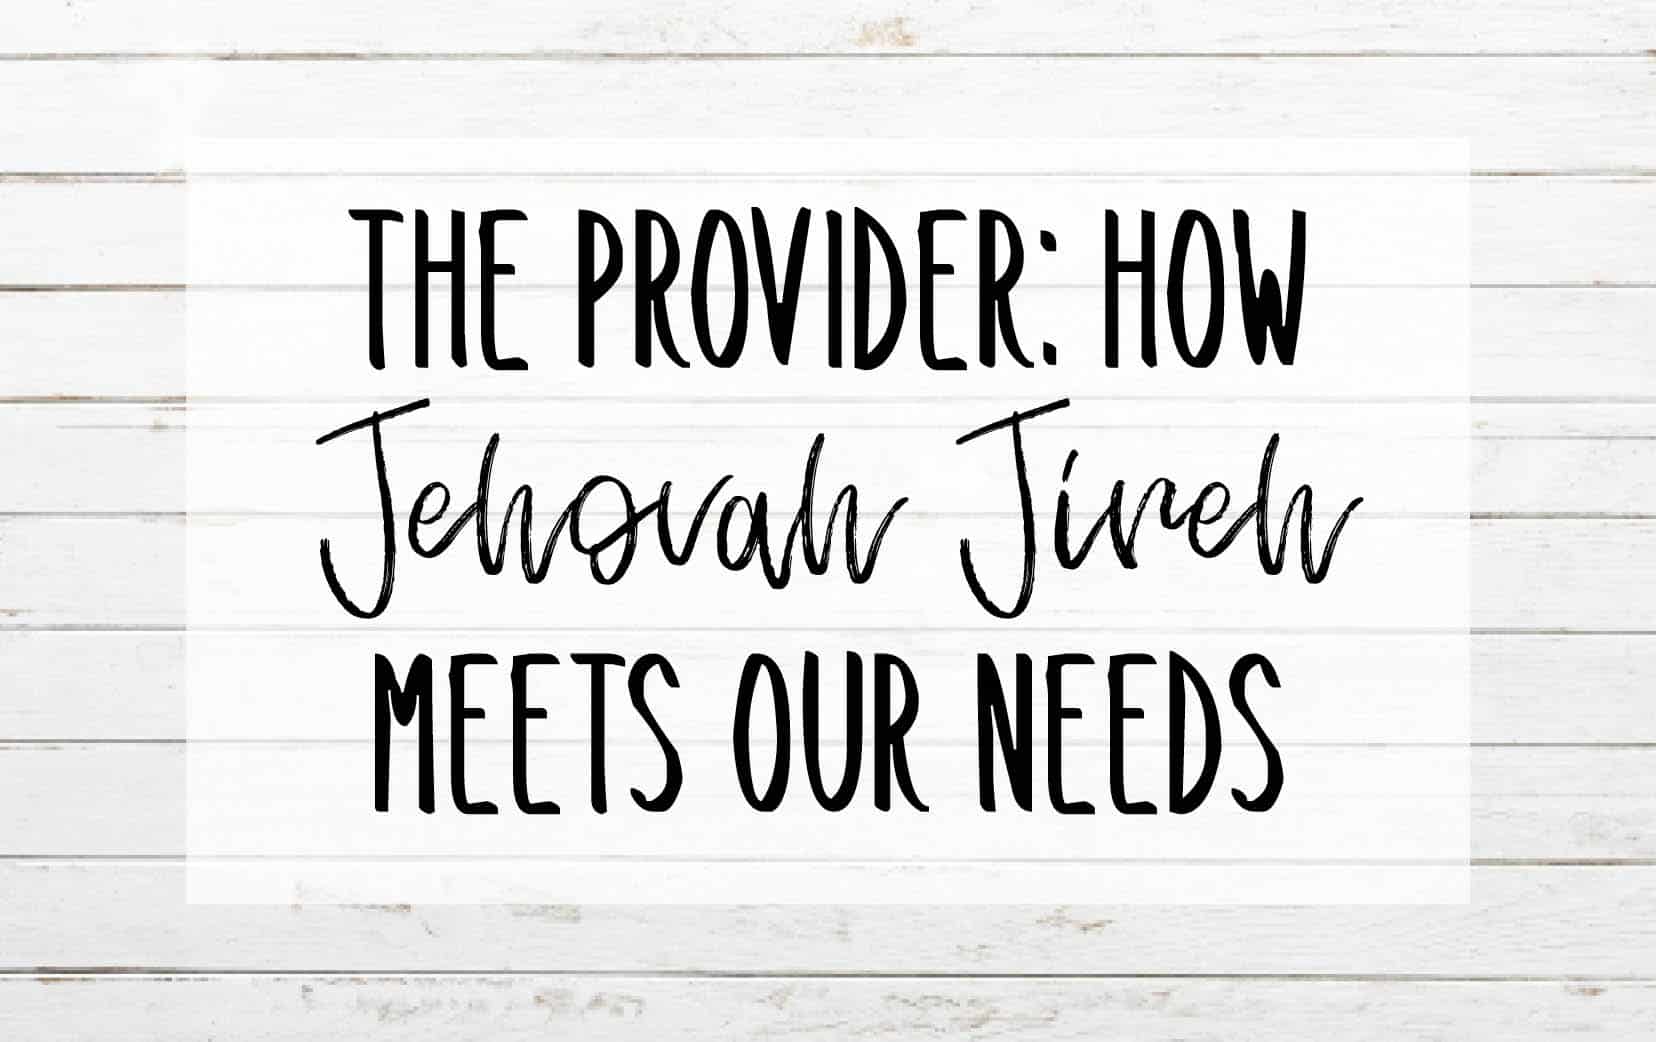 main image saying The Provider How Jehovah Jireh Meets Our Needs